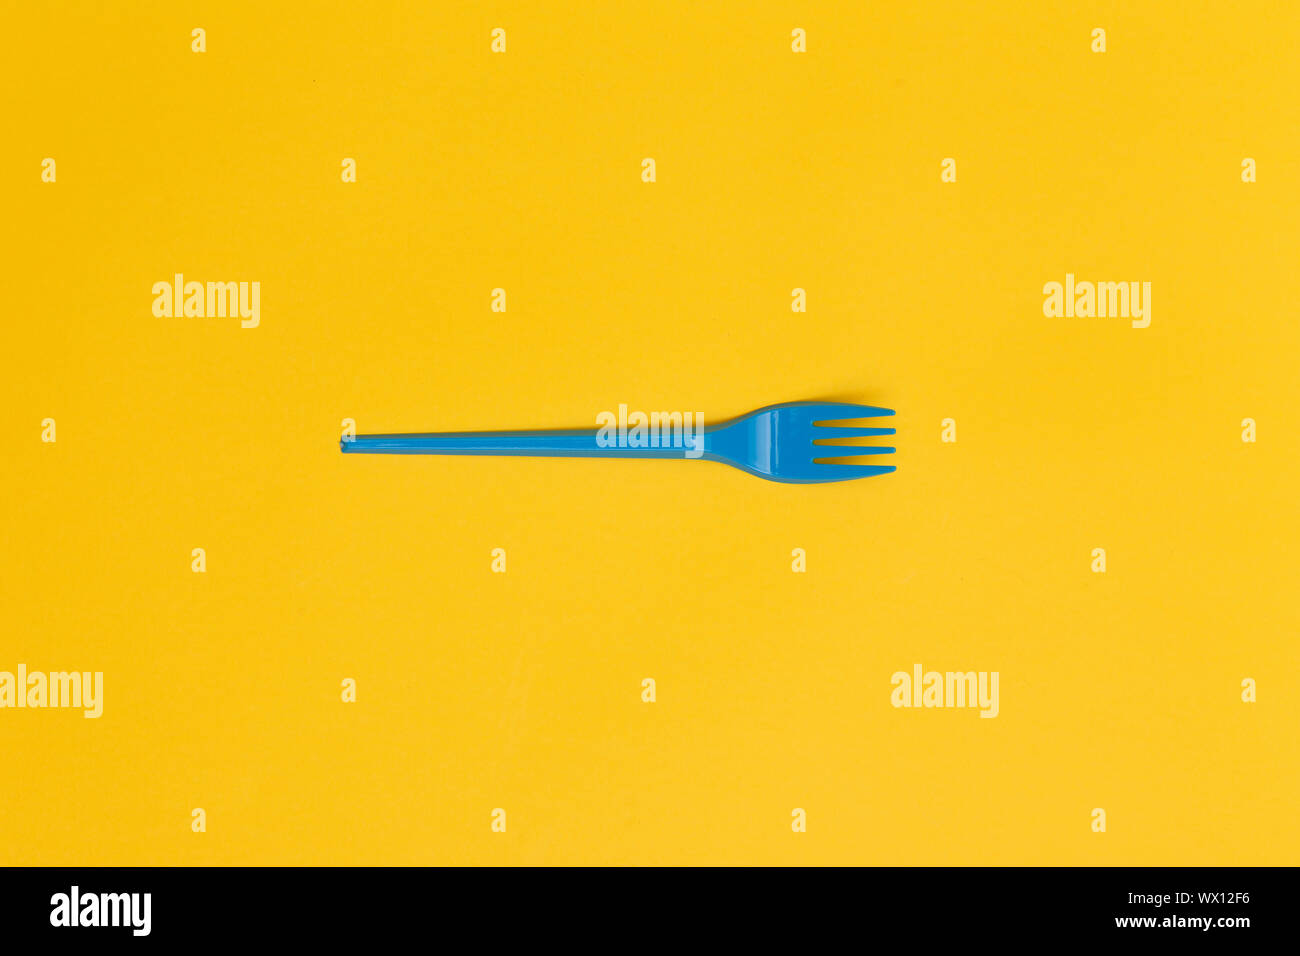 Single blue disposable fork over a yellow background. Stock Photo